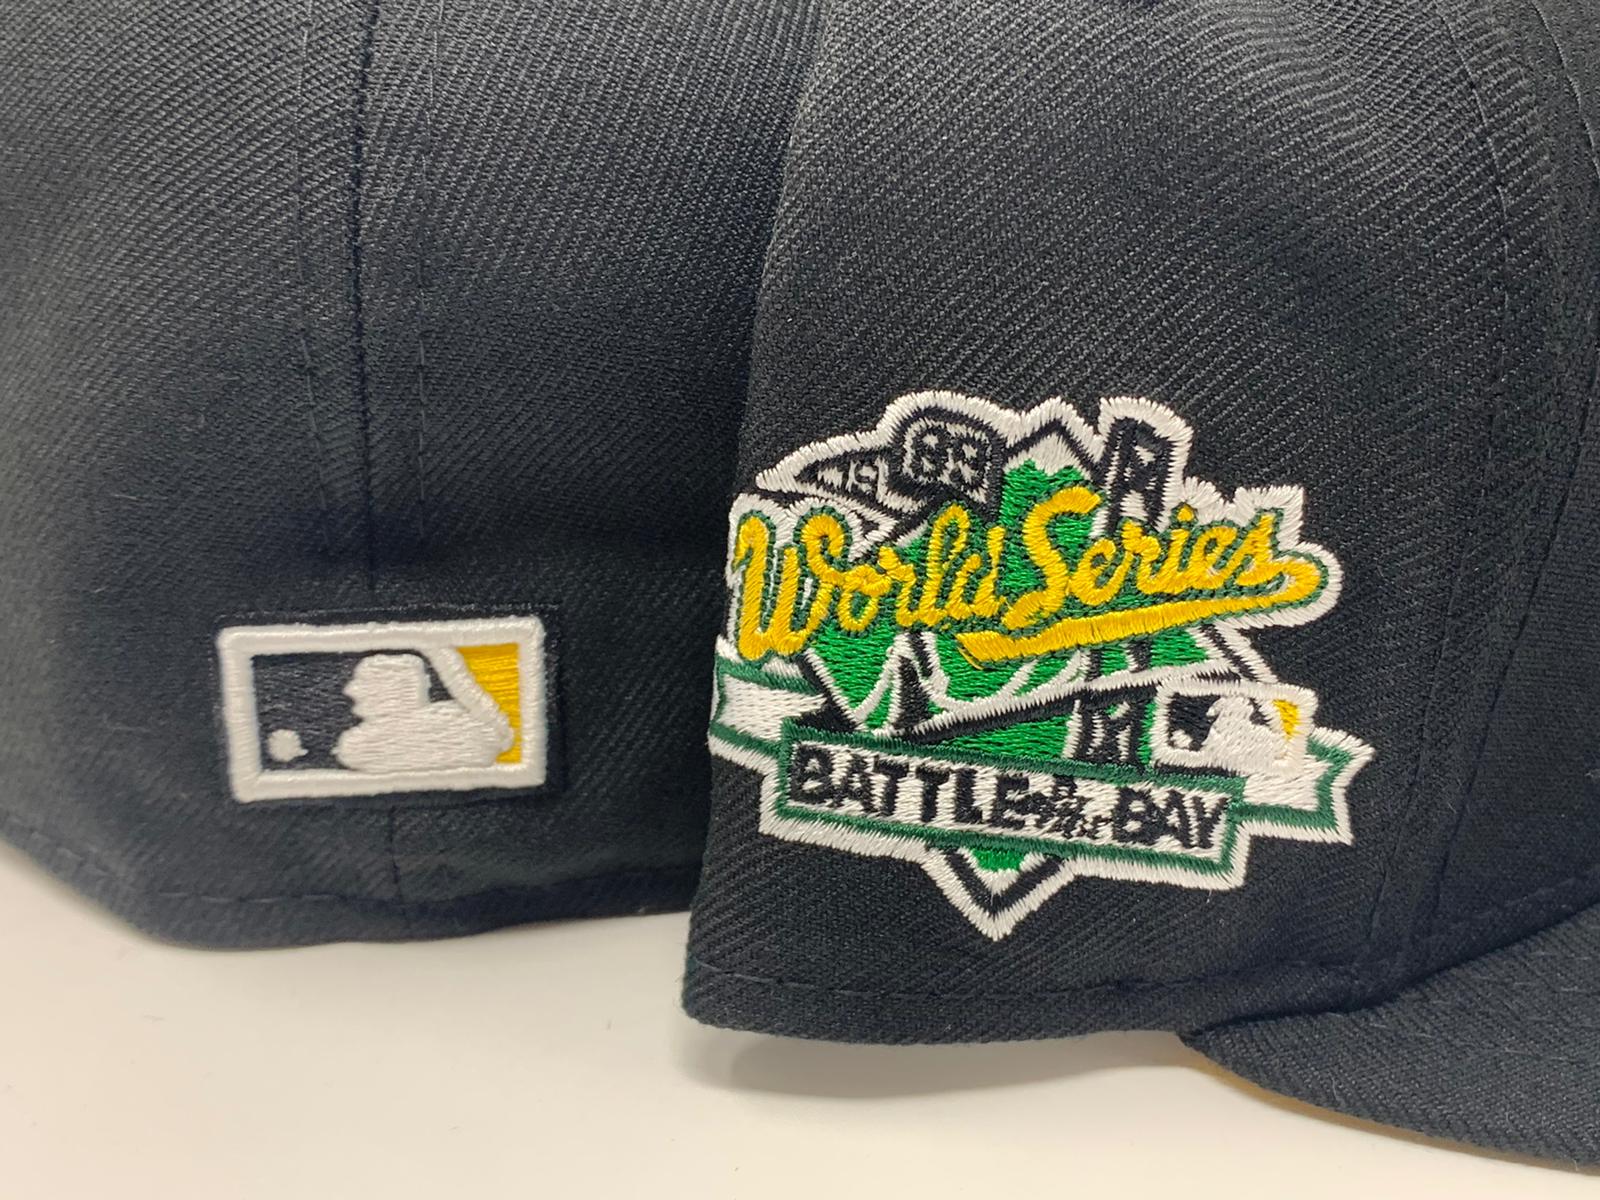 Oakland Athletics 1989 World Series New Era 59Fifty Fitted Hat (BATTLE OF  THE BAY GREEN UNDER BRIM)  1989 Patch:  athletics-1989-world-series-new-era-59fifty-fitted-hat-green-under-brim.html  BATTLE OF THE BAY Patch